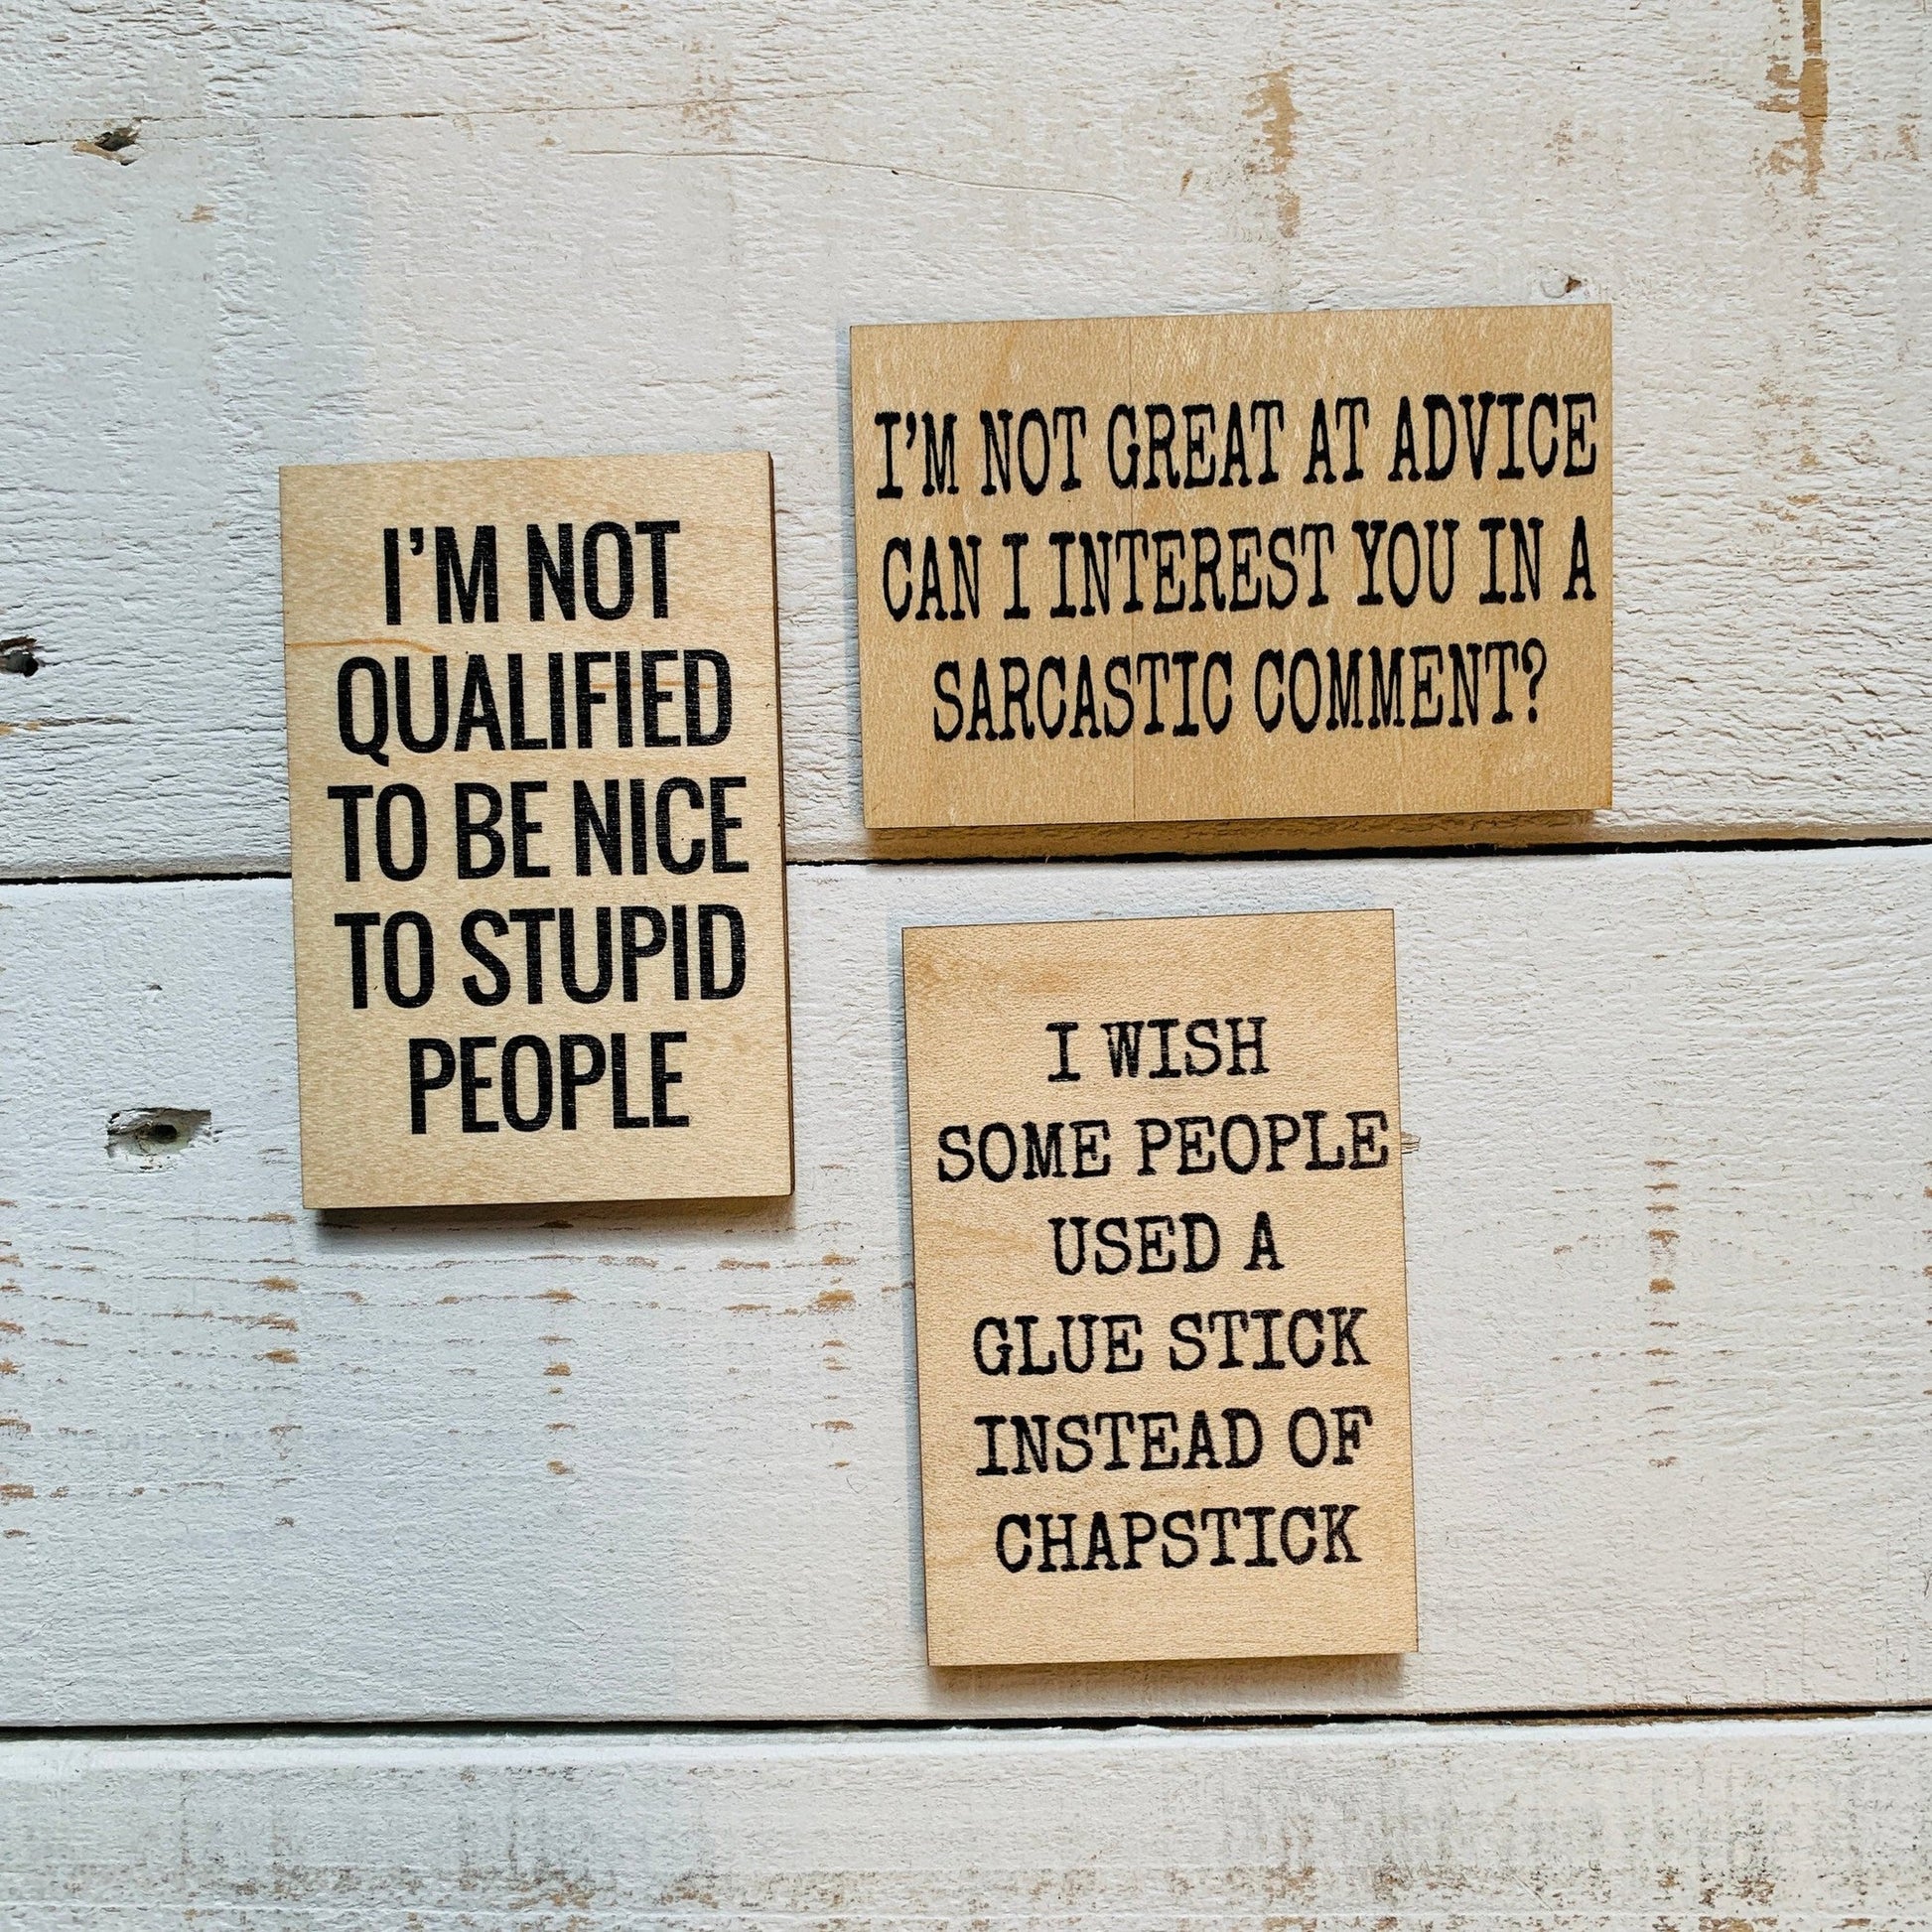 I'm Not Great At Advice Funny Wood Magnet l 2" x 3"